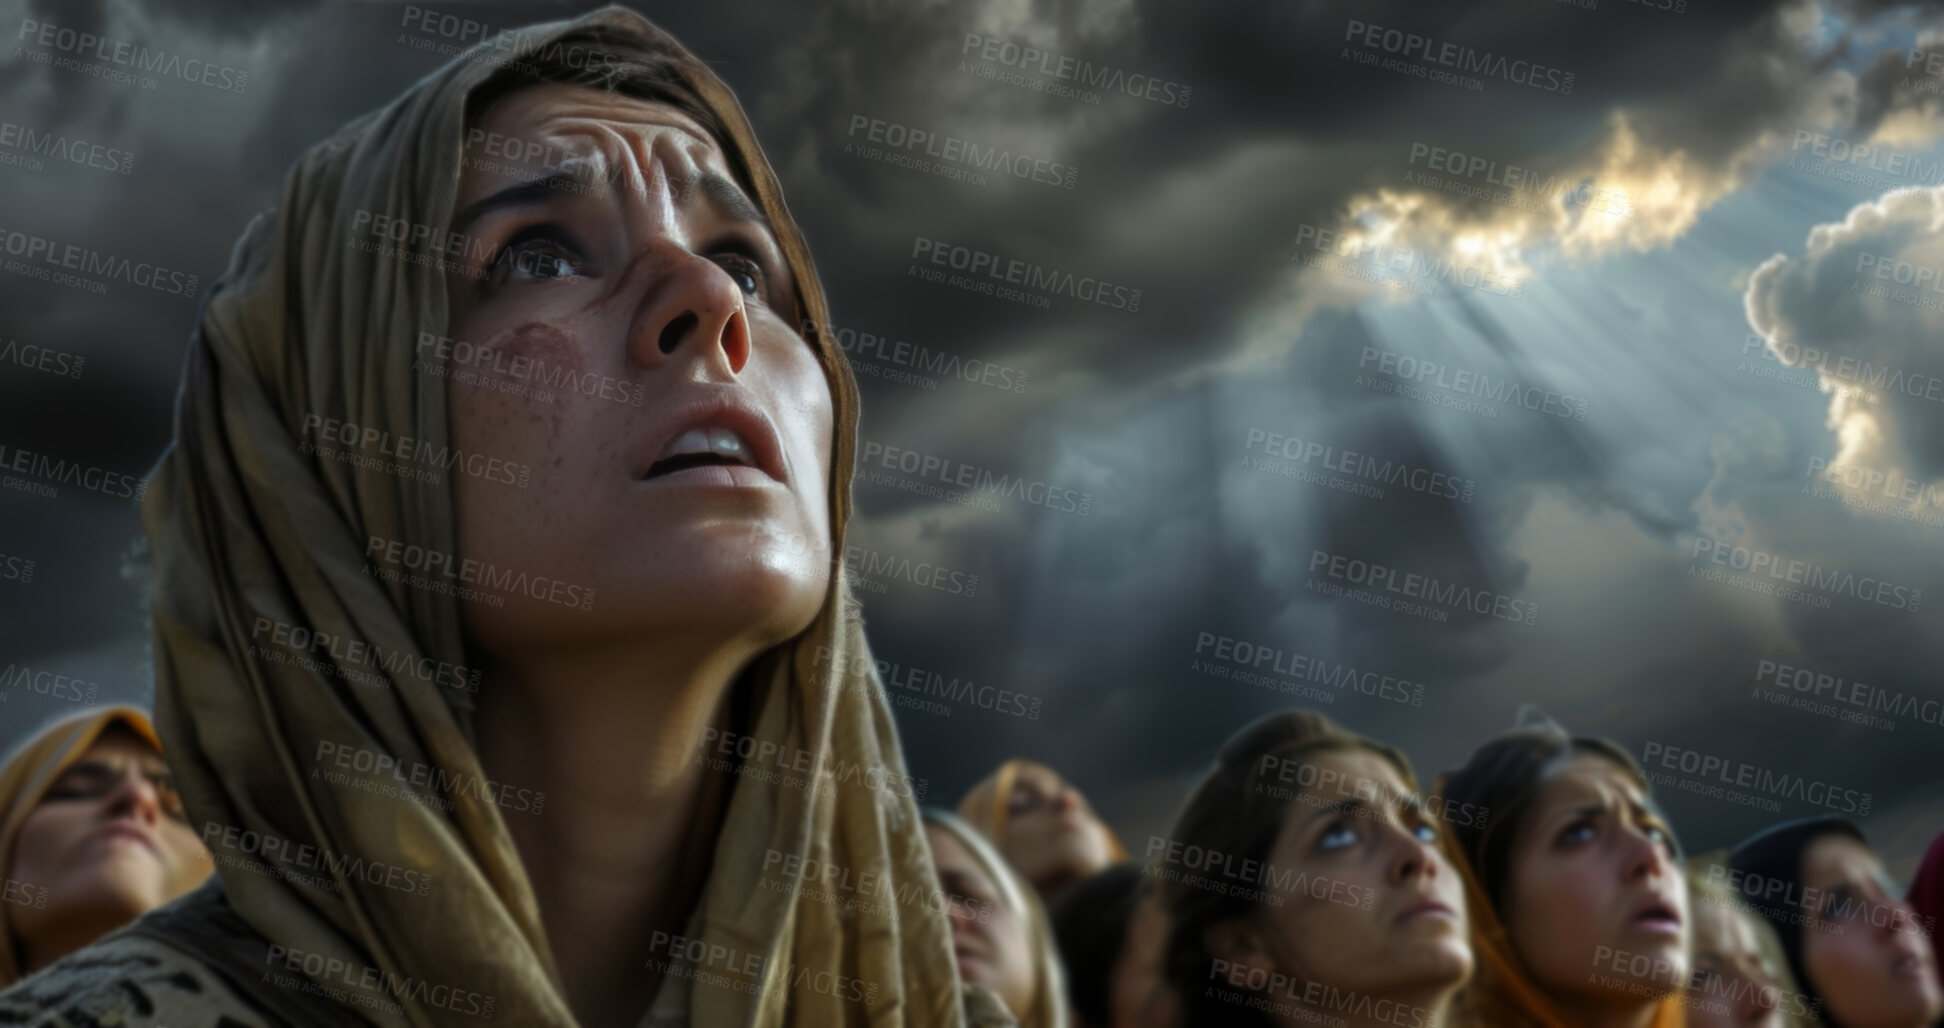 Buy stock photo People, god and salvation or heaven hope for Christianity religion for group community, faith or apocalypse. Women, looking up and sky for redemption on battlefield, day of judgment or armageddon